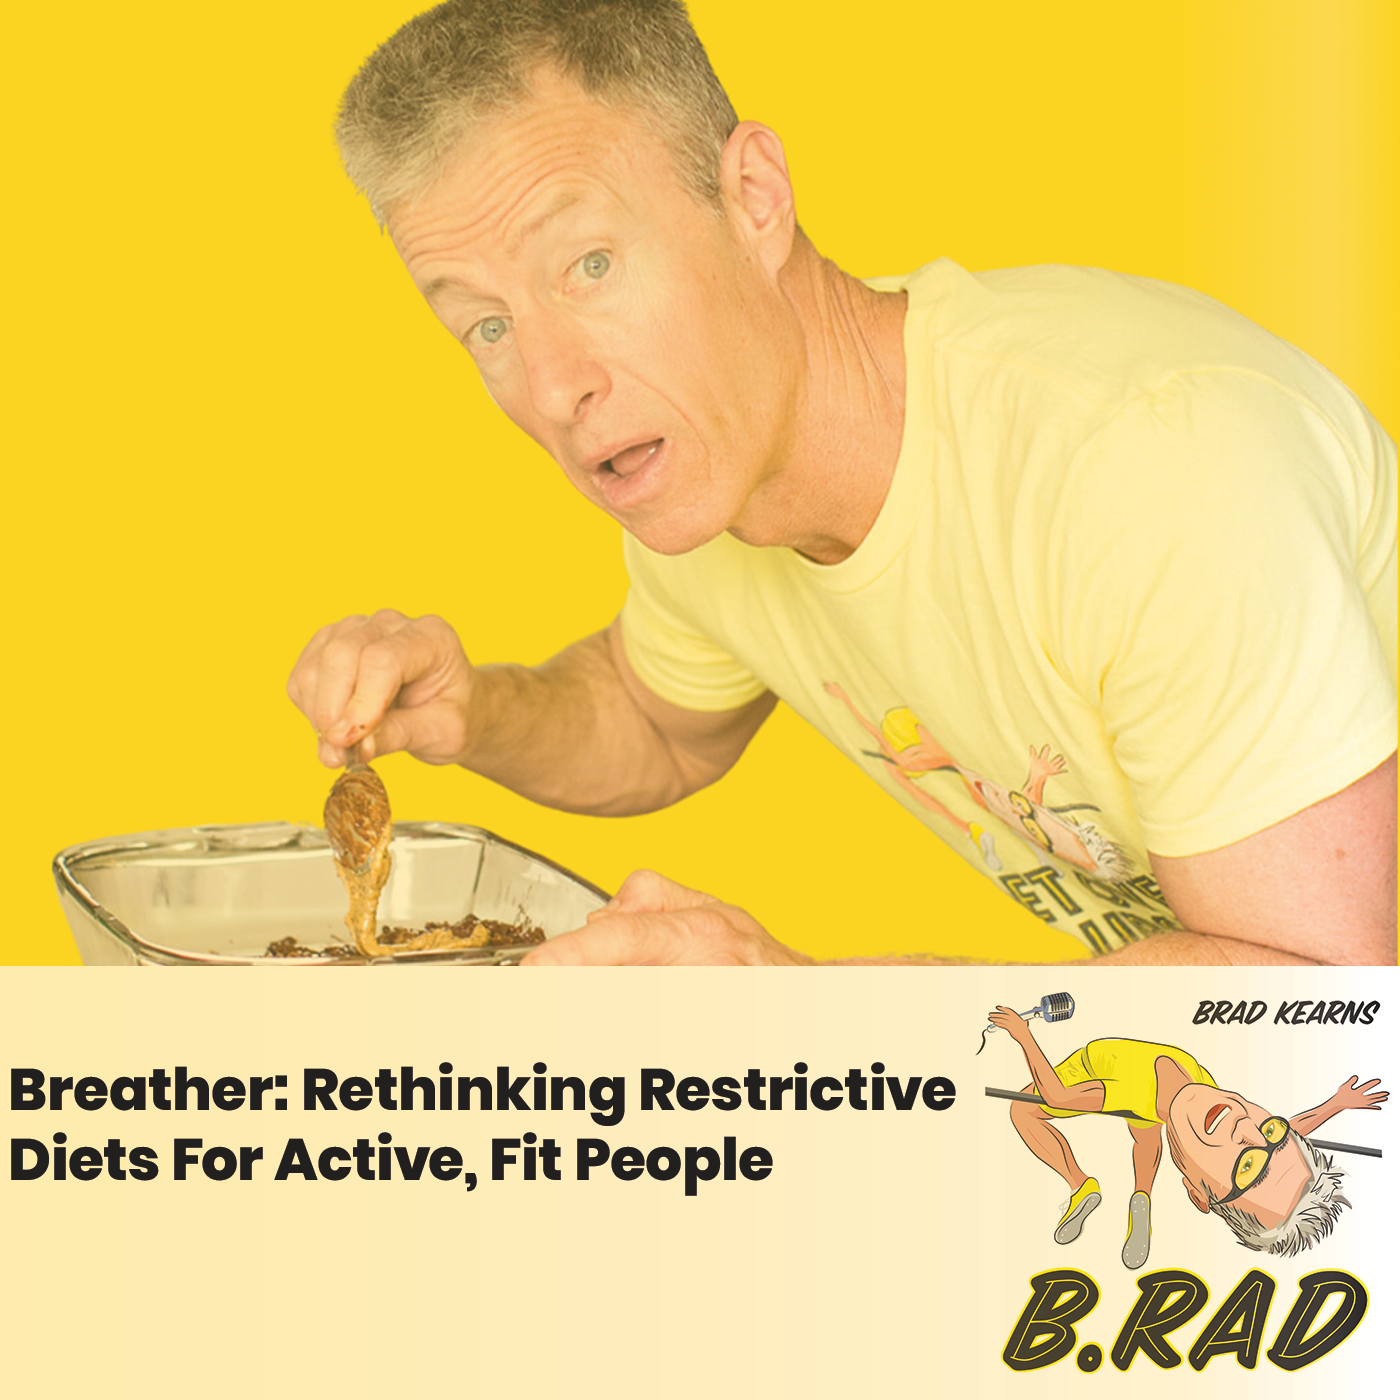 Breather: Rethinking Restrictive Diets For Active, Fit People